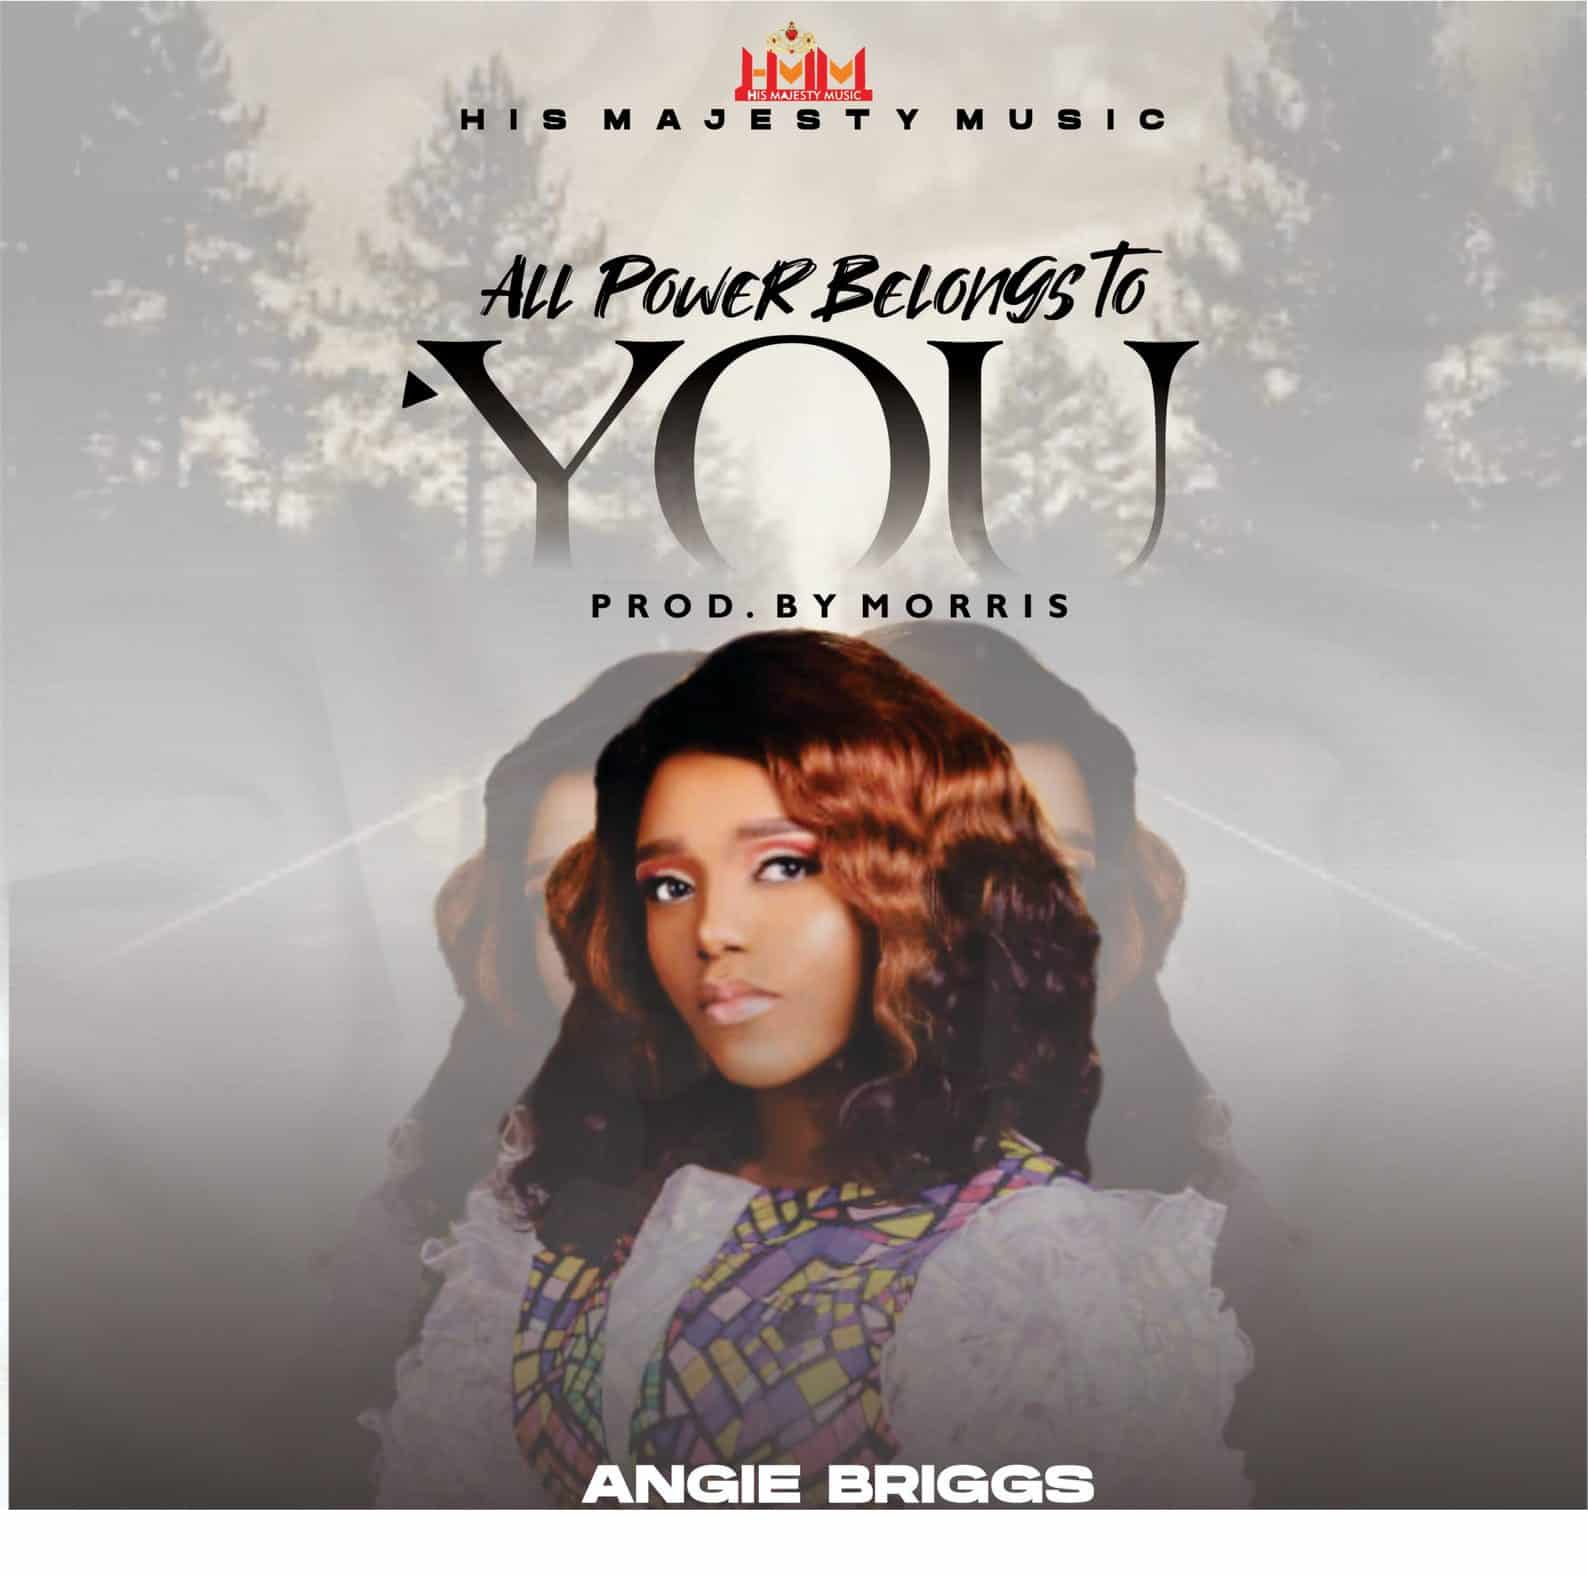 Download Mp3: Angie Briggs - All Power Belongs To You